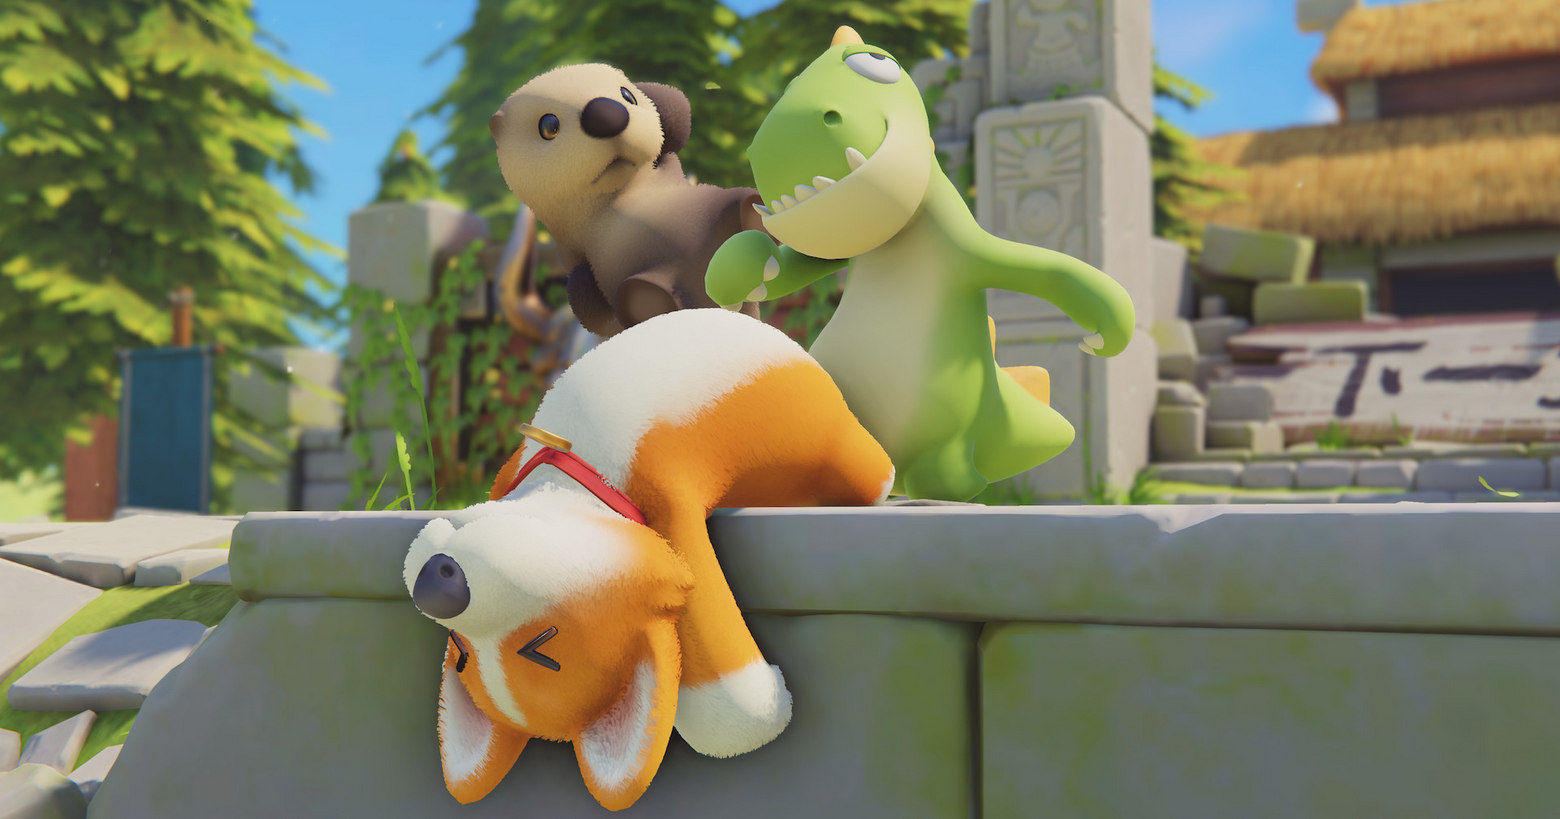 Convince yourself of the game's cuteness by taking a look at this screenshot of Party Animals: In perspective view, we are looking at a gray stone plateau on which there are three extremely cute animal creatures. A small cute orange-white colored dog is lying over the edge of the plateau with its eyes closed, and we look into its swooning face. The dog is centered at the bottom of the image in a long shot. Directly behind him in the center of the picture is a green baby dragon with small protruding teeth and a smug grin. To the left behind him, a cute little brown beaver is just jumping at him with a kick. In the background, trees and the facade of a house with a thatched roof can be seen in the blur. The title has a release date and offers besides fun gameplay also probably crossplay and cross-platform support.